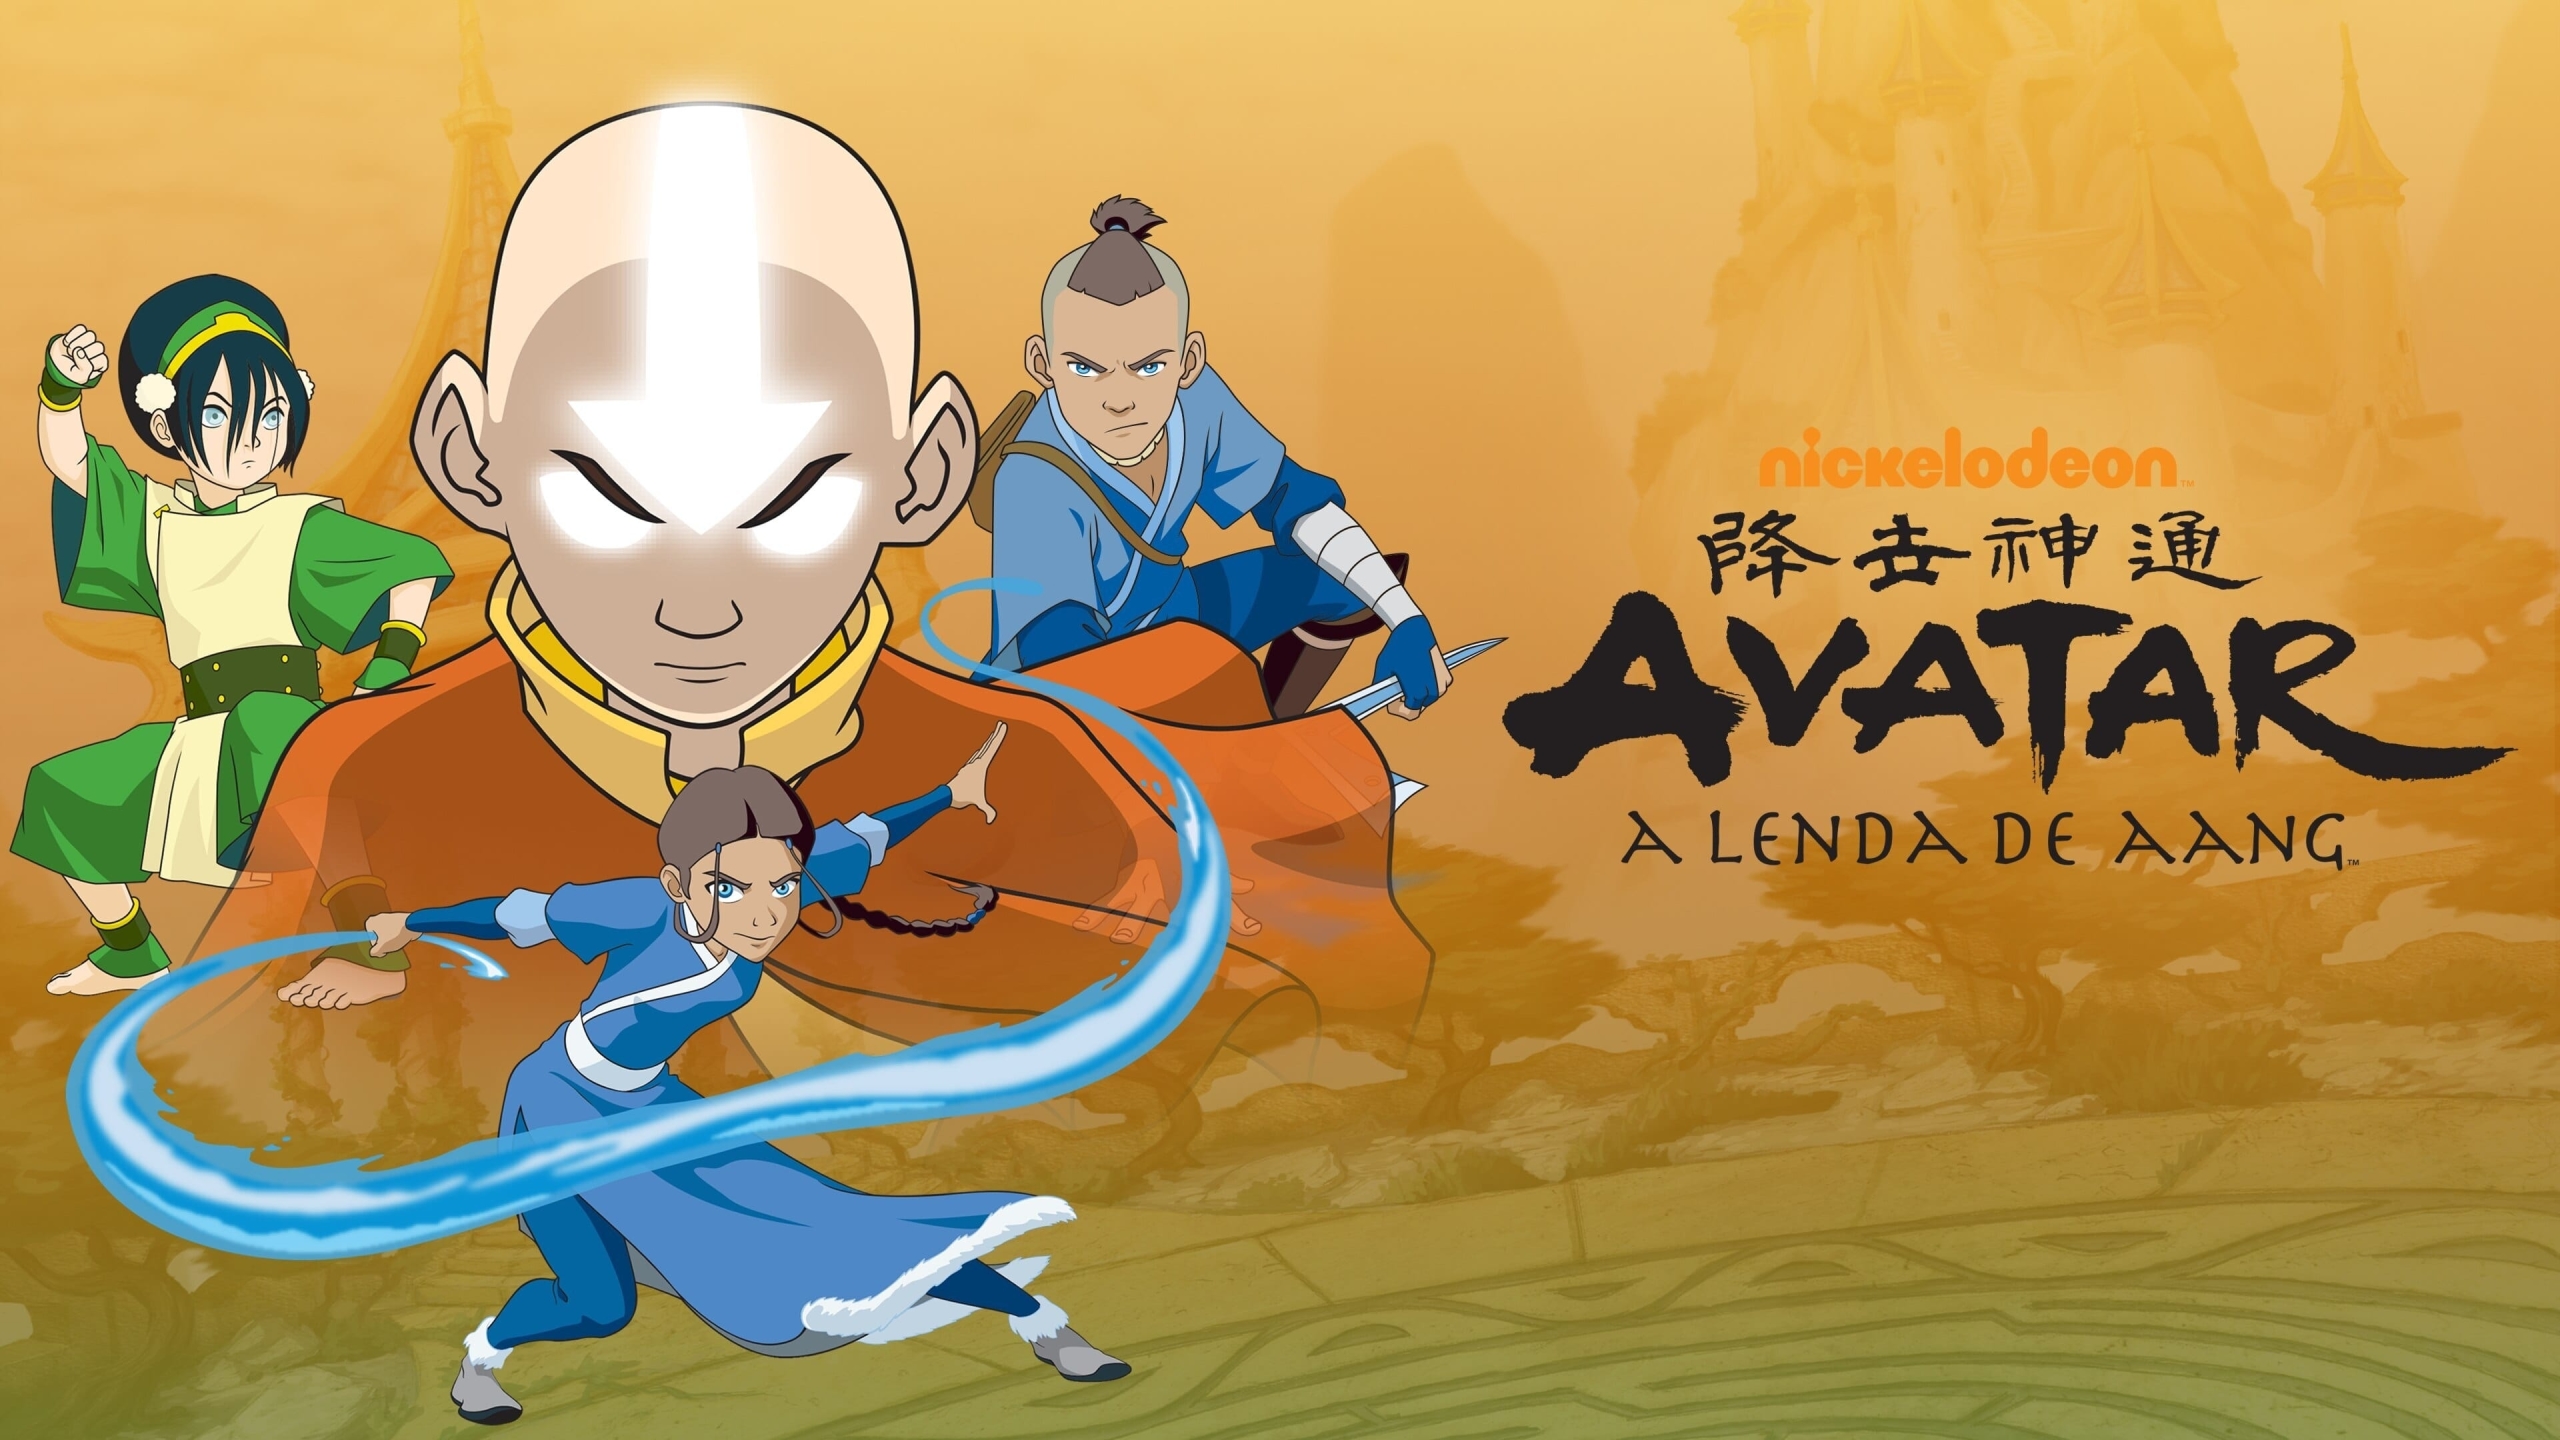 Avatar for windows download free